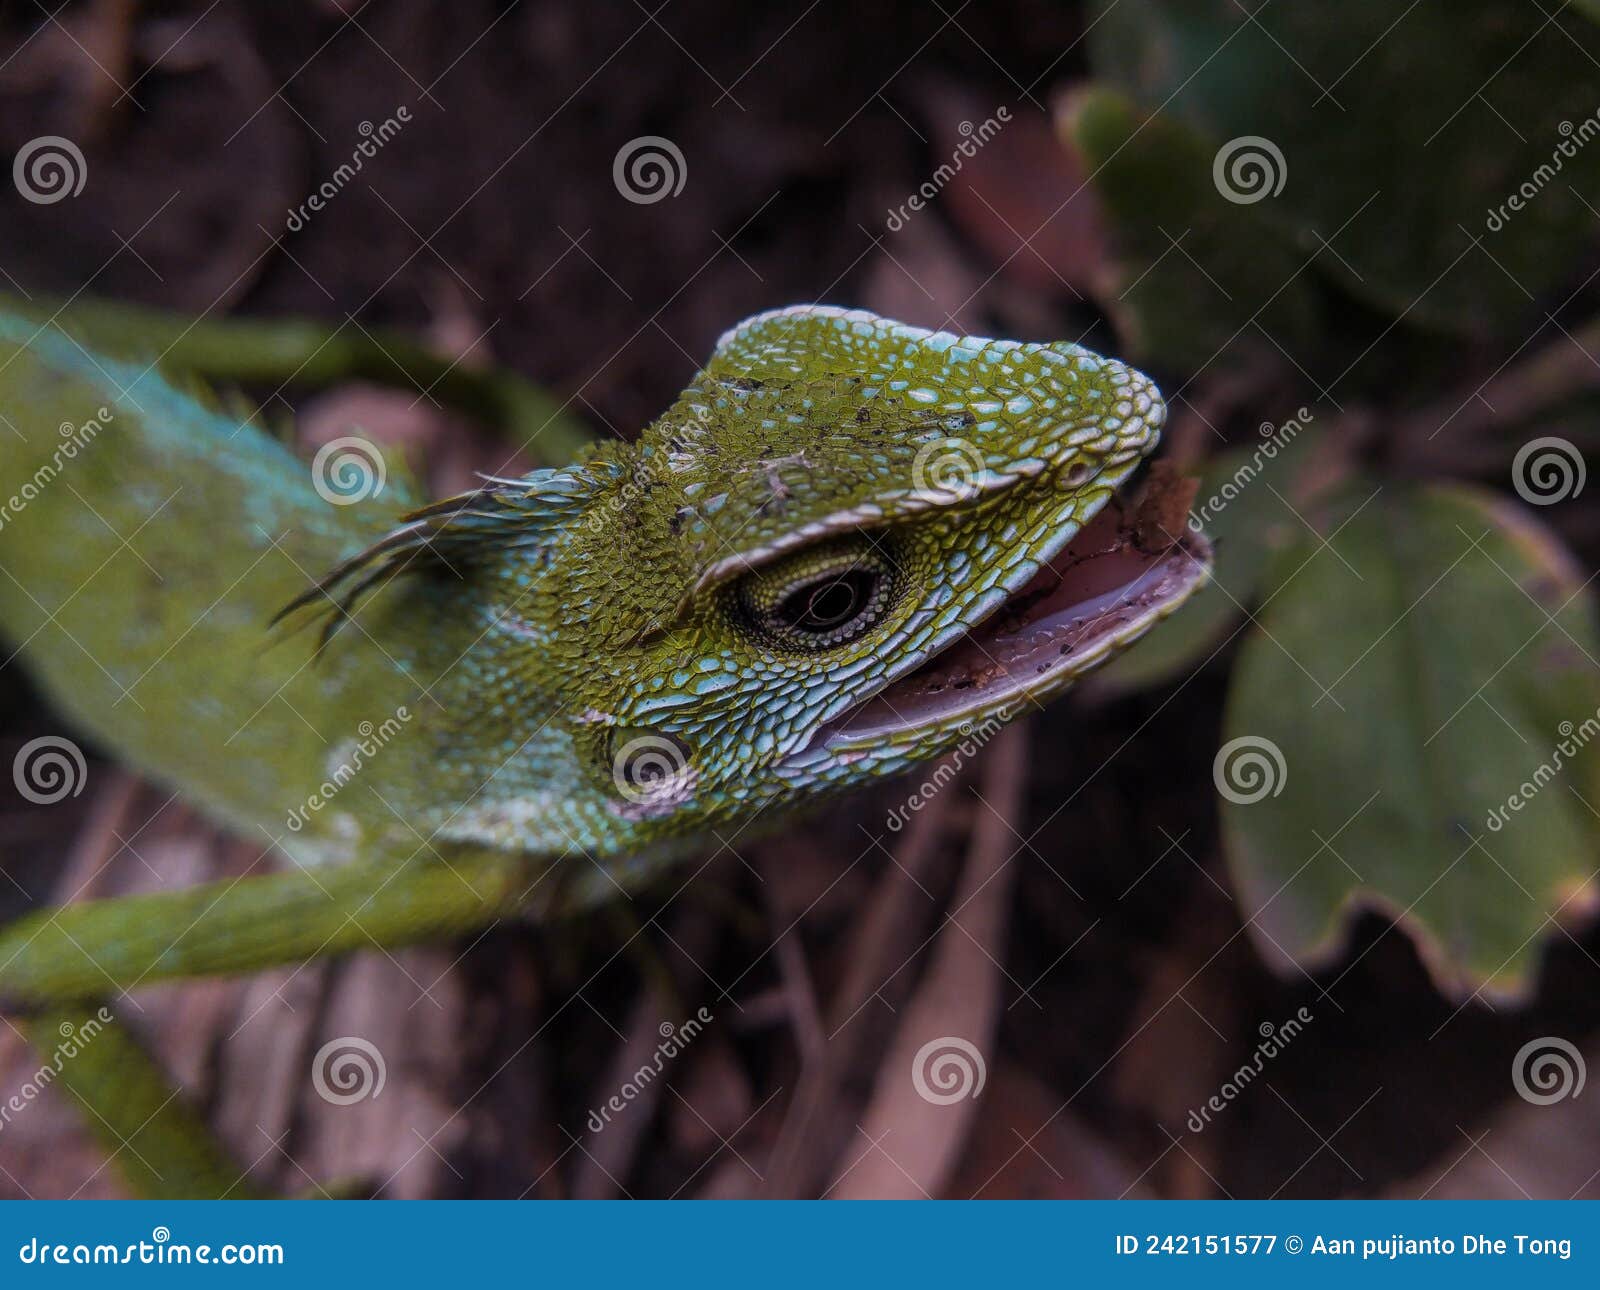 green chameleon on the tree. reptil. fauna, animals.